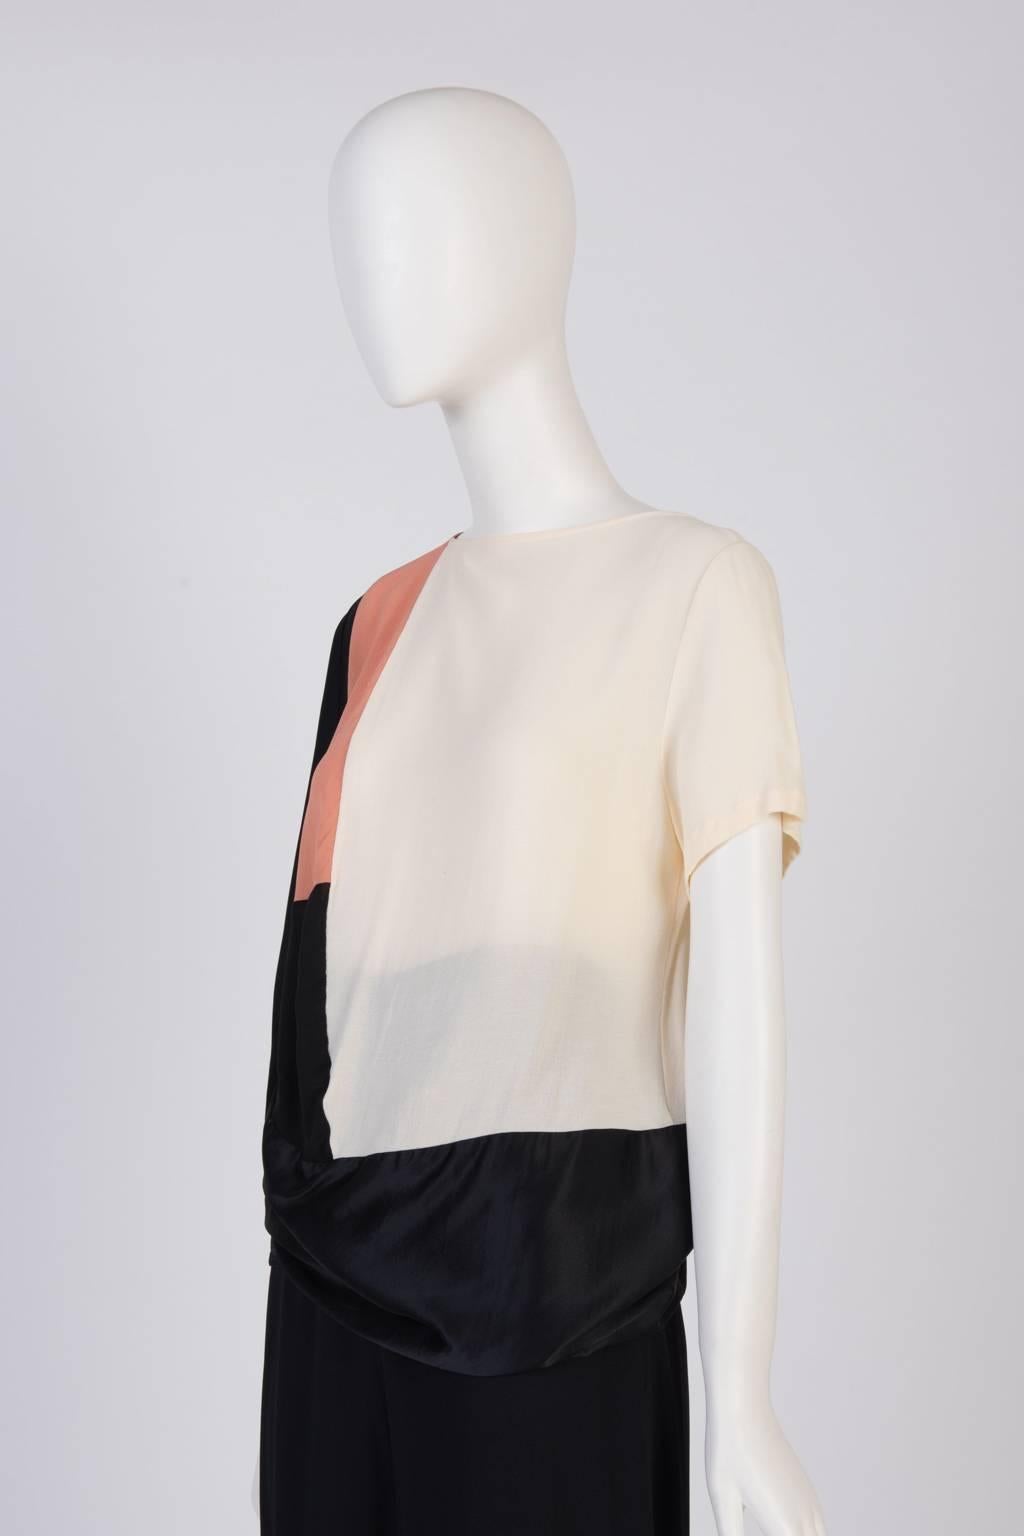 A loose fit short sleeve top with multi color panels, featuring different textures: semi sheer and satin rayon.